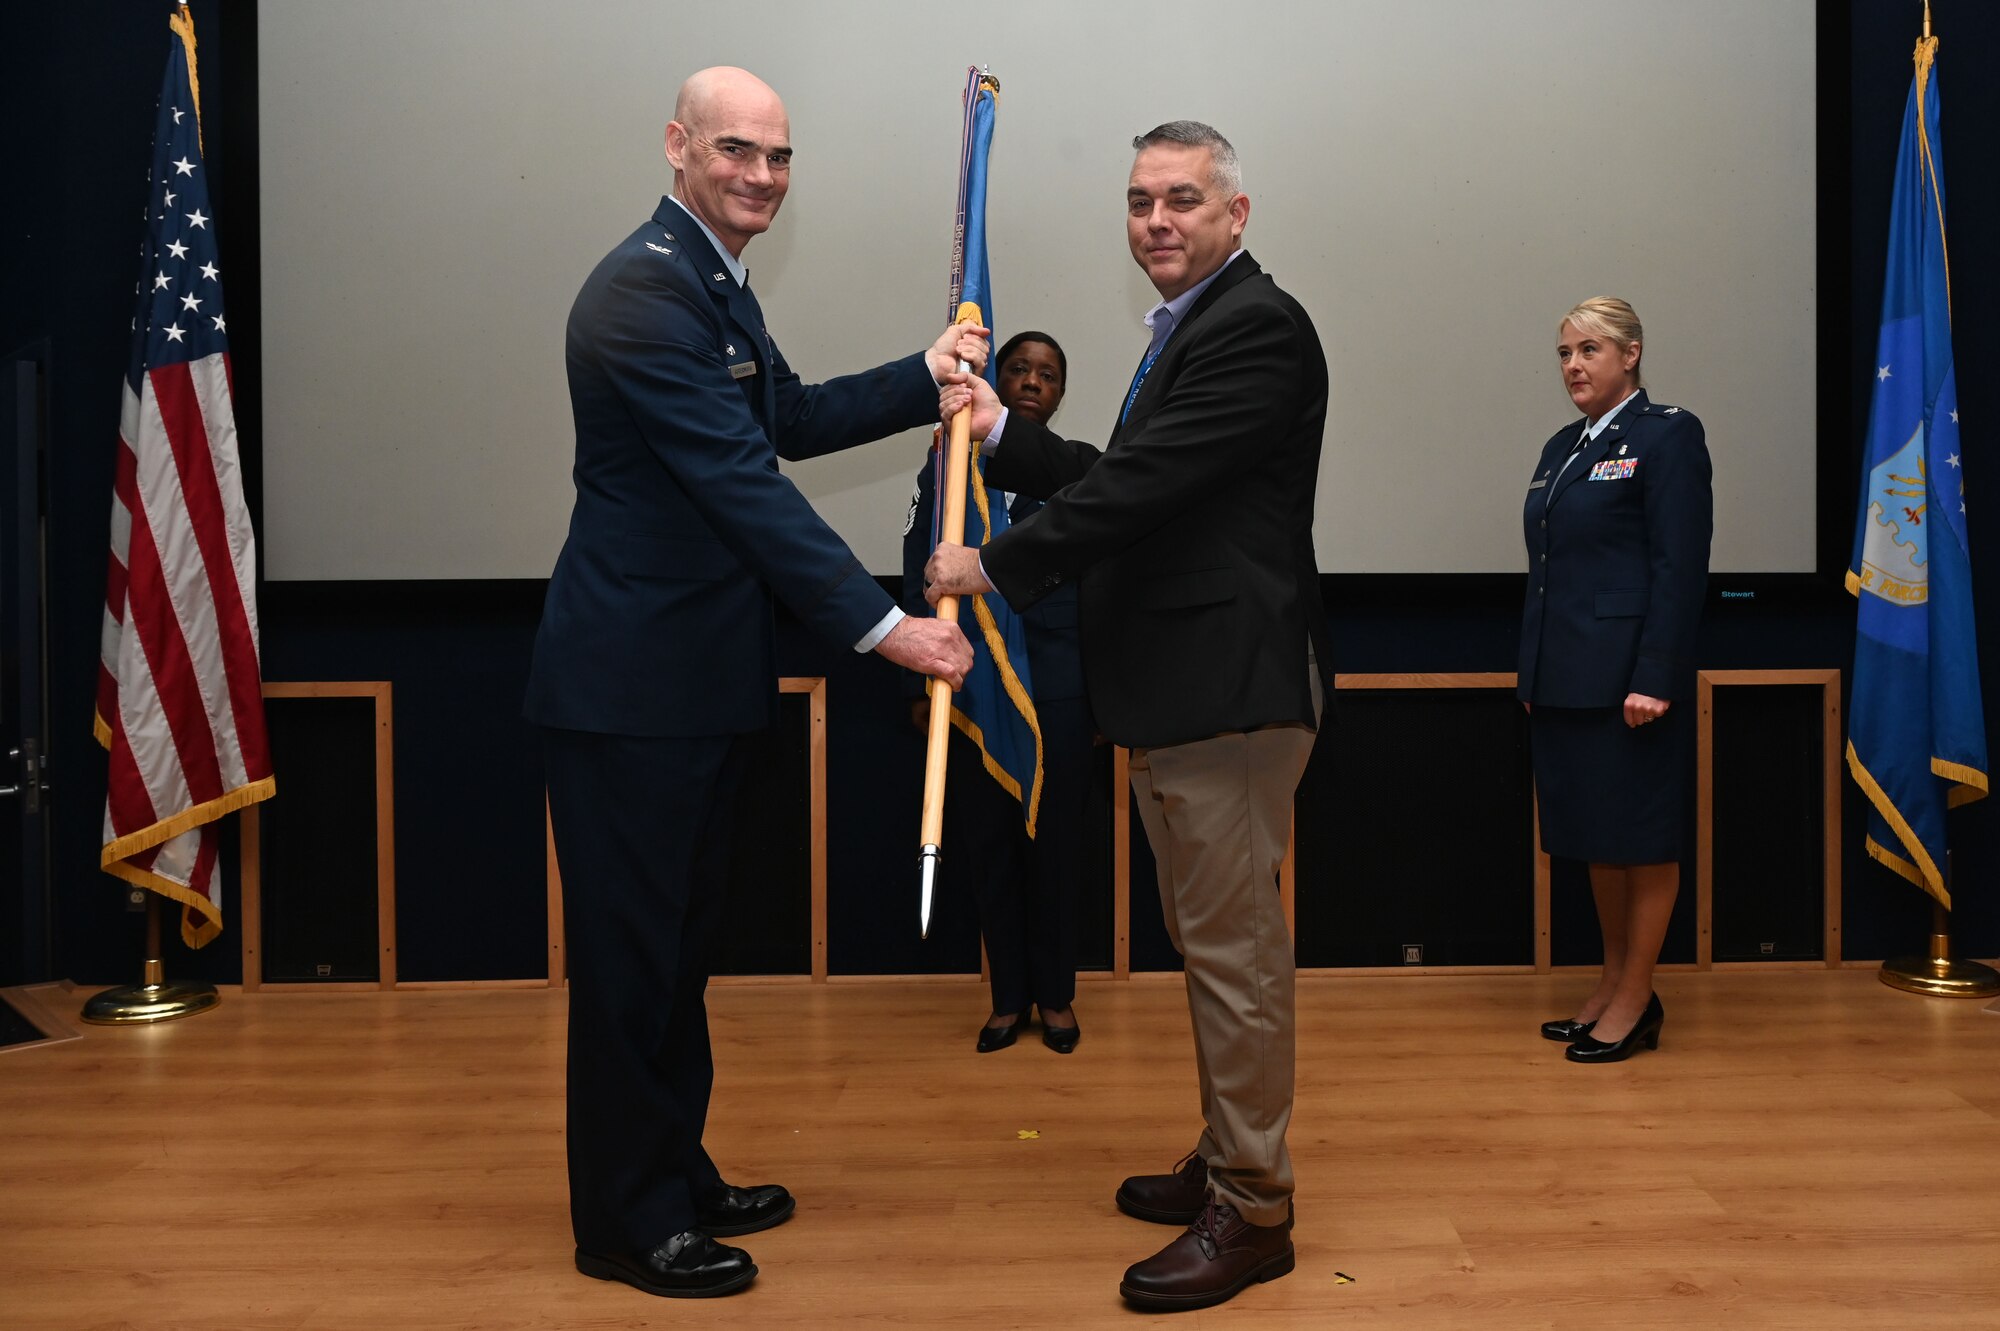 Col. William Gutermuth, 433rd Airlift Wing commander, hands the 433rd AW guidon to Alex Melo, community relations manager at Brooks Real Estate, during the Honorary Commanders’ Induction Ceremony on Joint Base San Antonio-Lackland, Texas, Oct. 15, 2023. Honorary commanders have opportunities to learn about their units and commanders through C-5M Super Galaxy tours, demonstrations, events and flights.